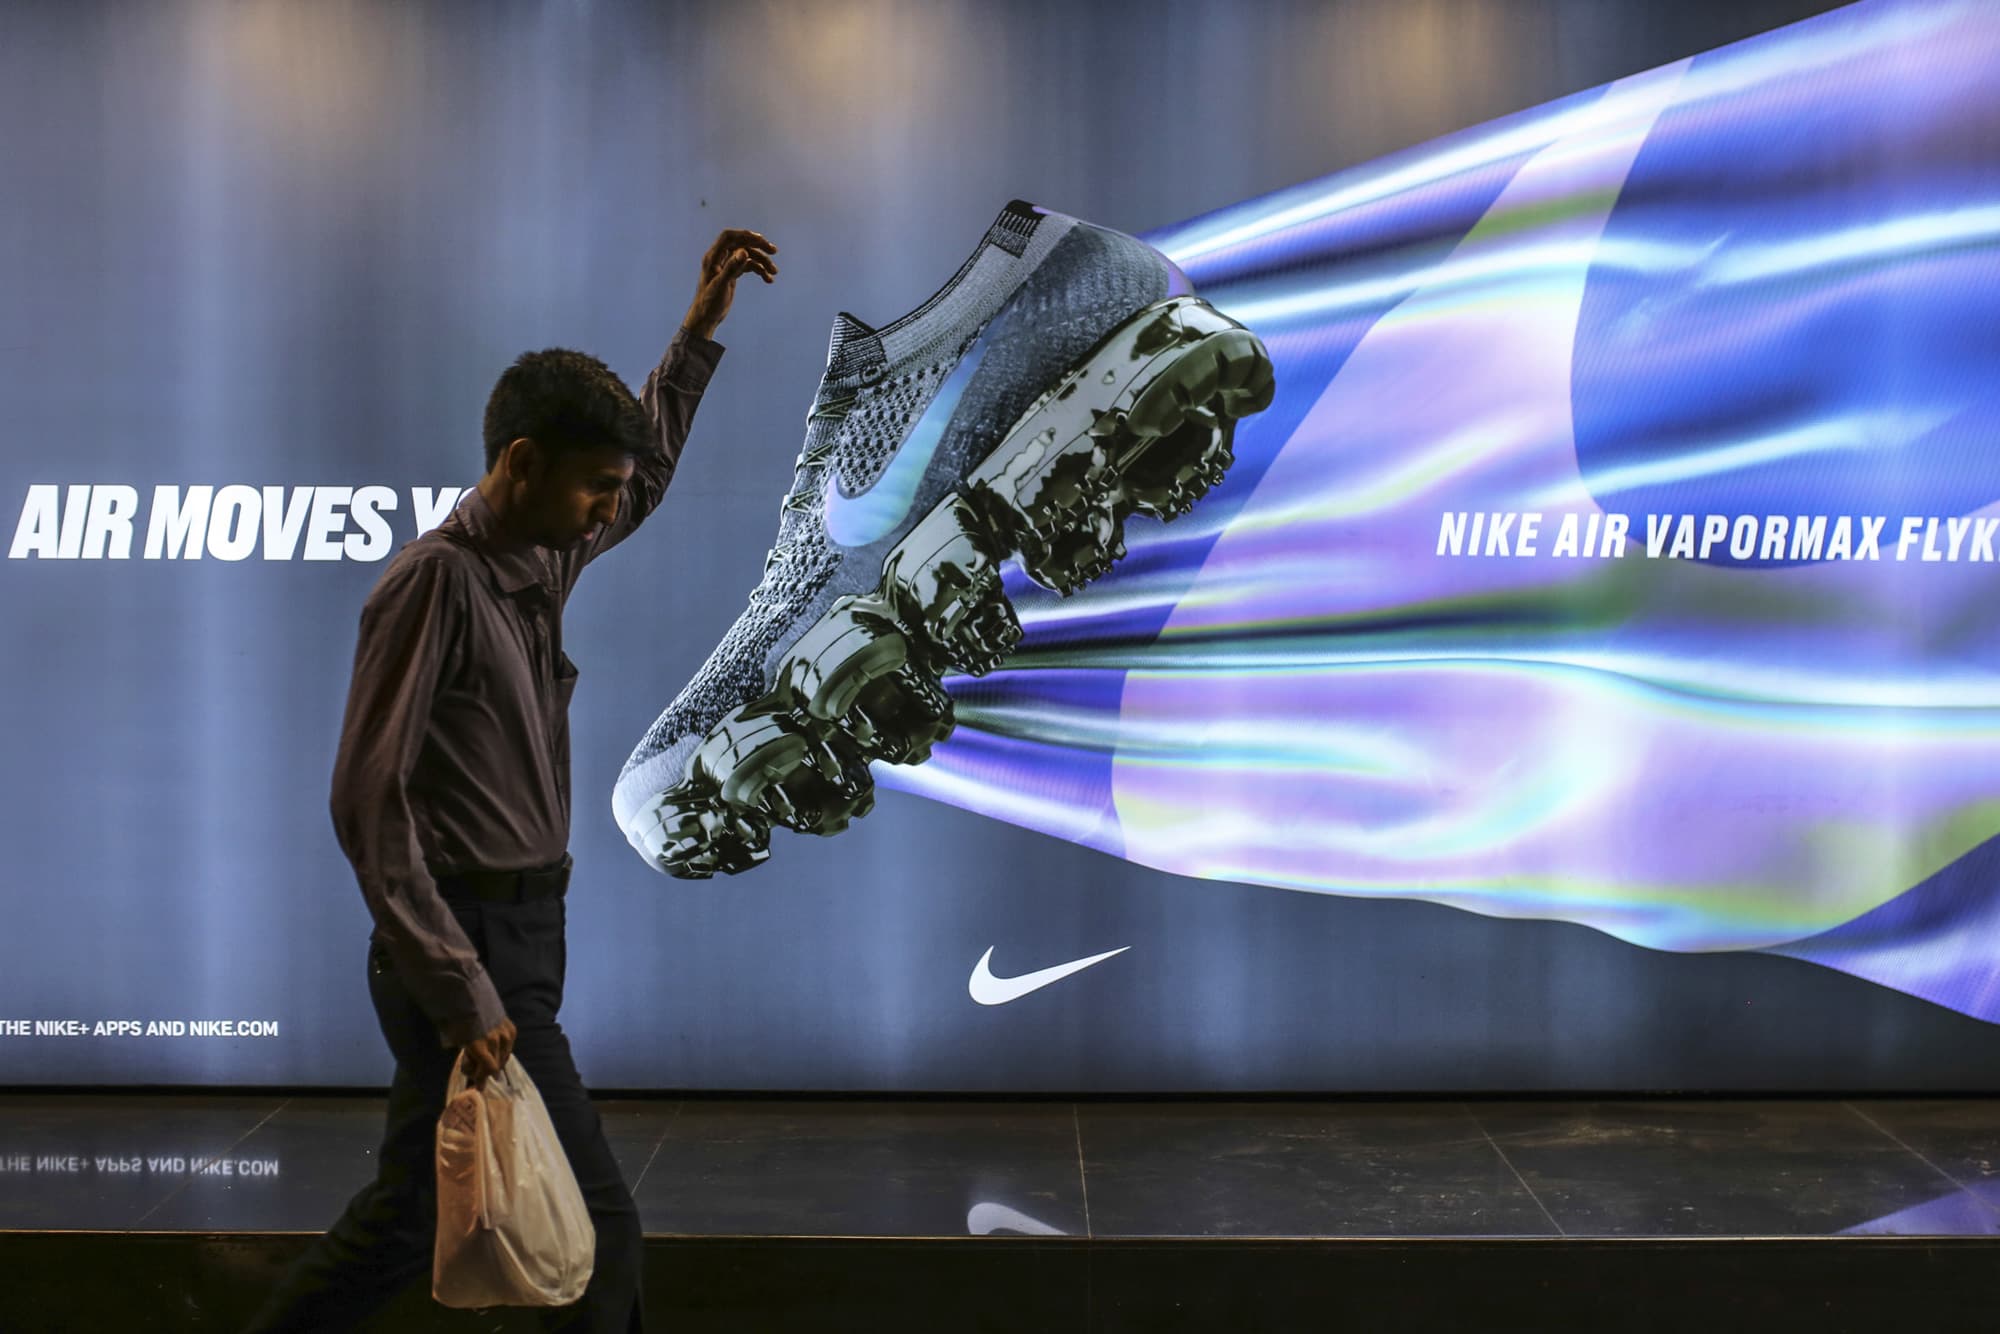 Insights from Leaked Audio: Nike's Focus on Digital Transformation Amidst Top Executive Departure